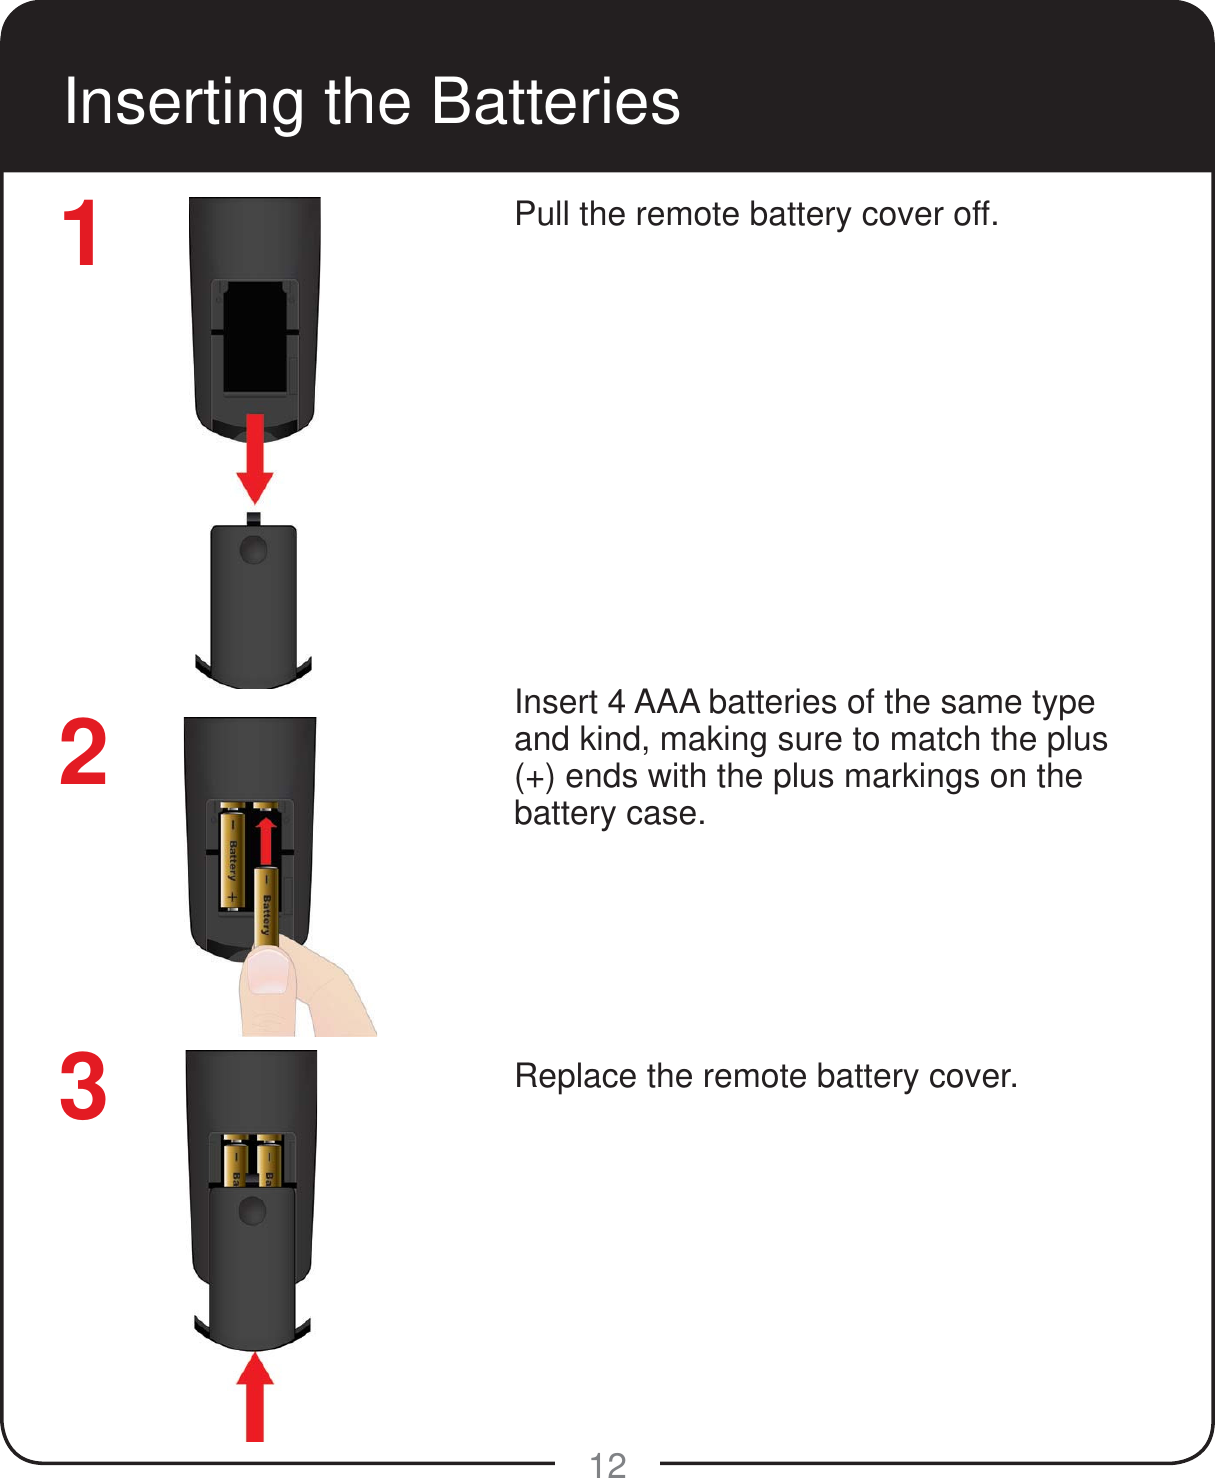 12Inserting the BatteriesPull the remote battery cover off.Insert 4 AAA batteries of the same type and kind, making sure to match the plus (+) ends with the plus markings on the battery case.Replace the remote battery cover.123